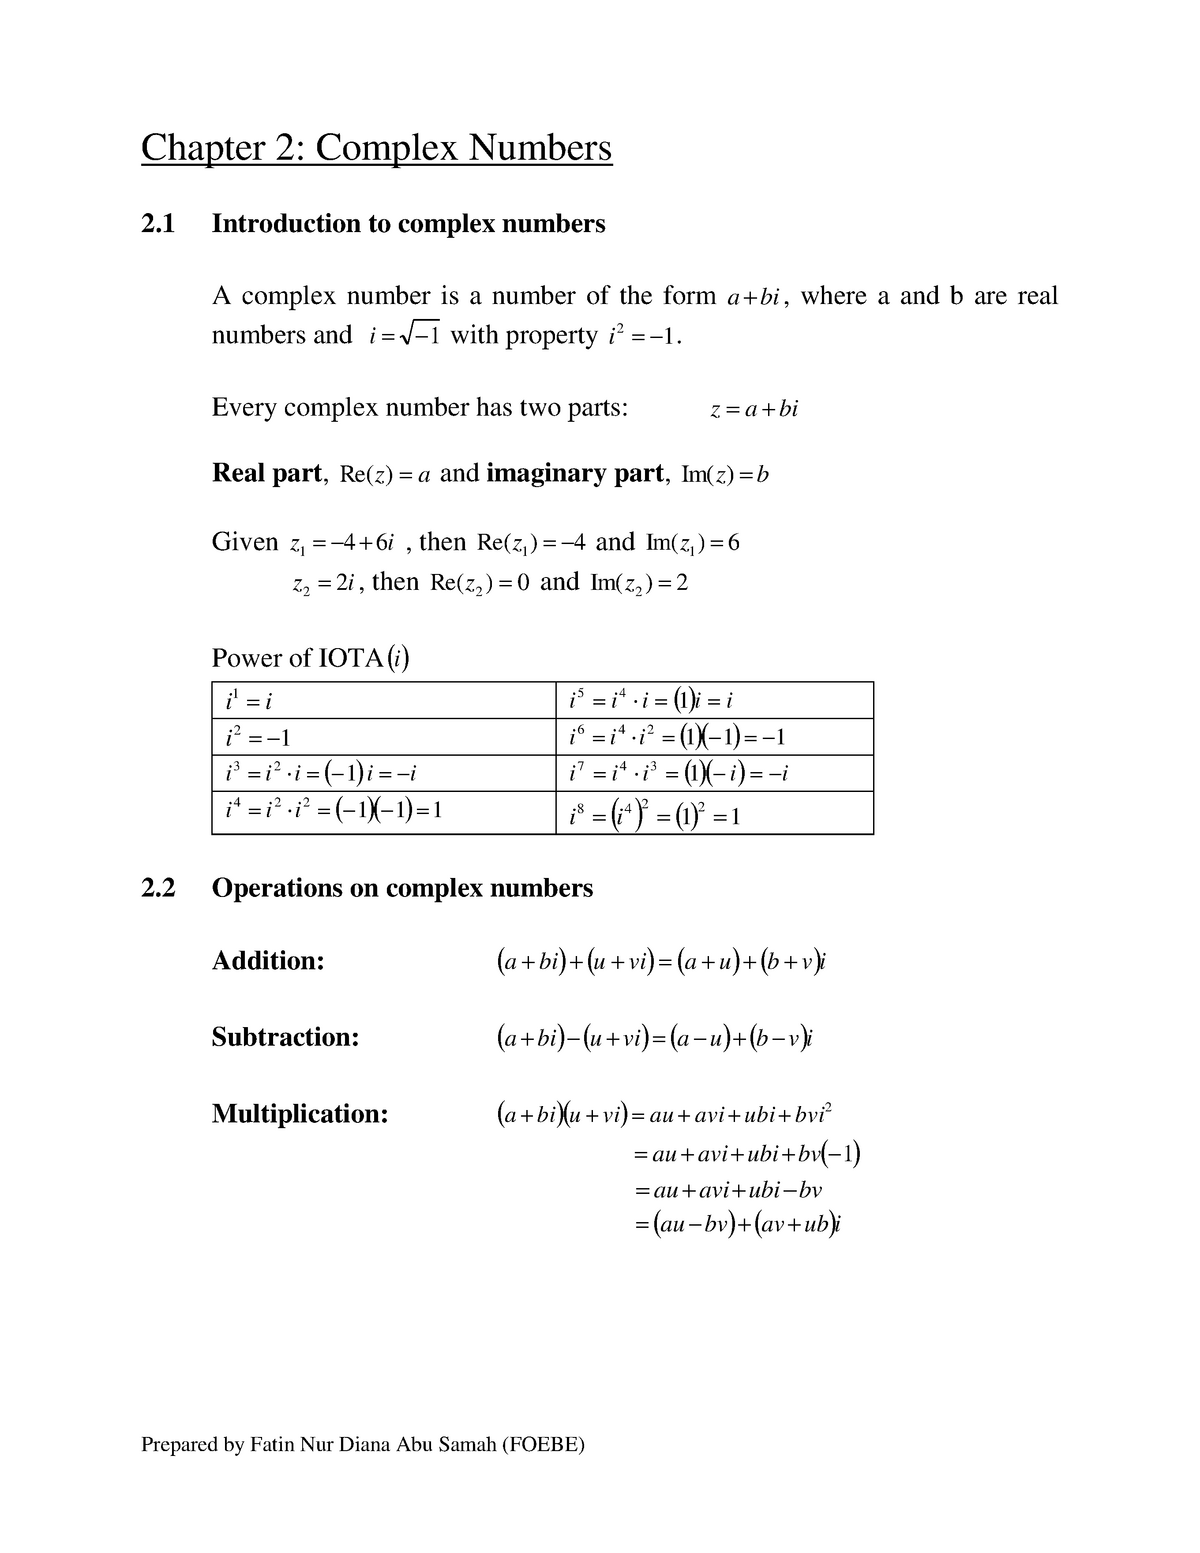 eem3113-engineering-maths-chapter-2-summary-complex-numbers